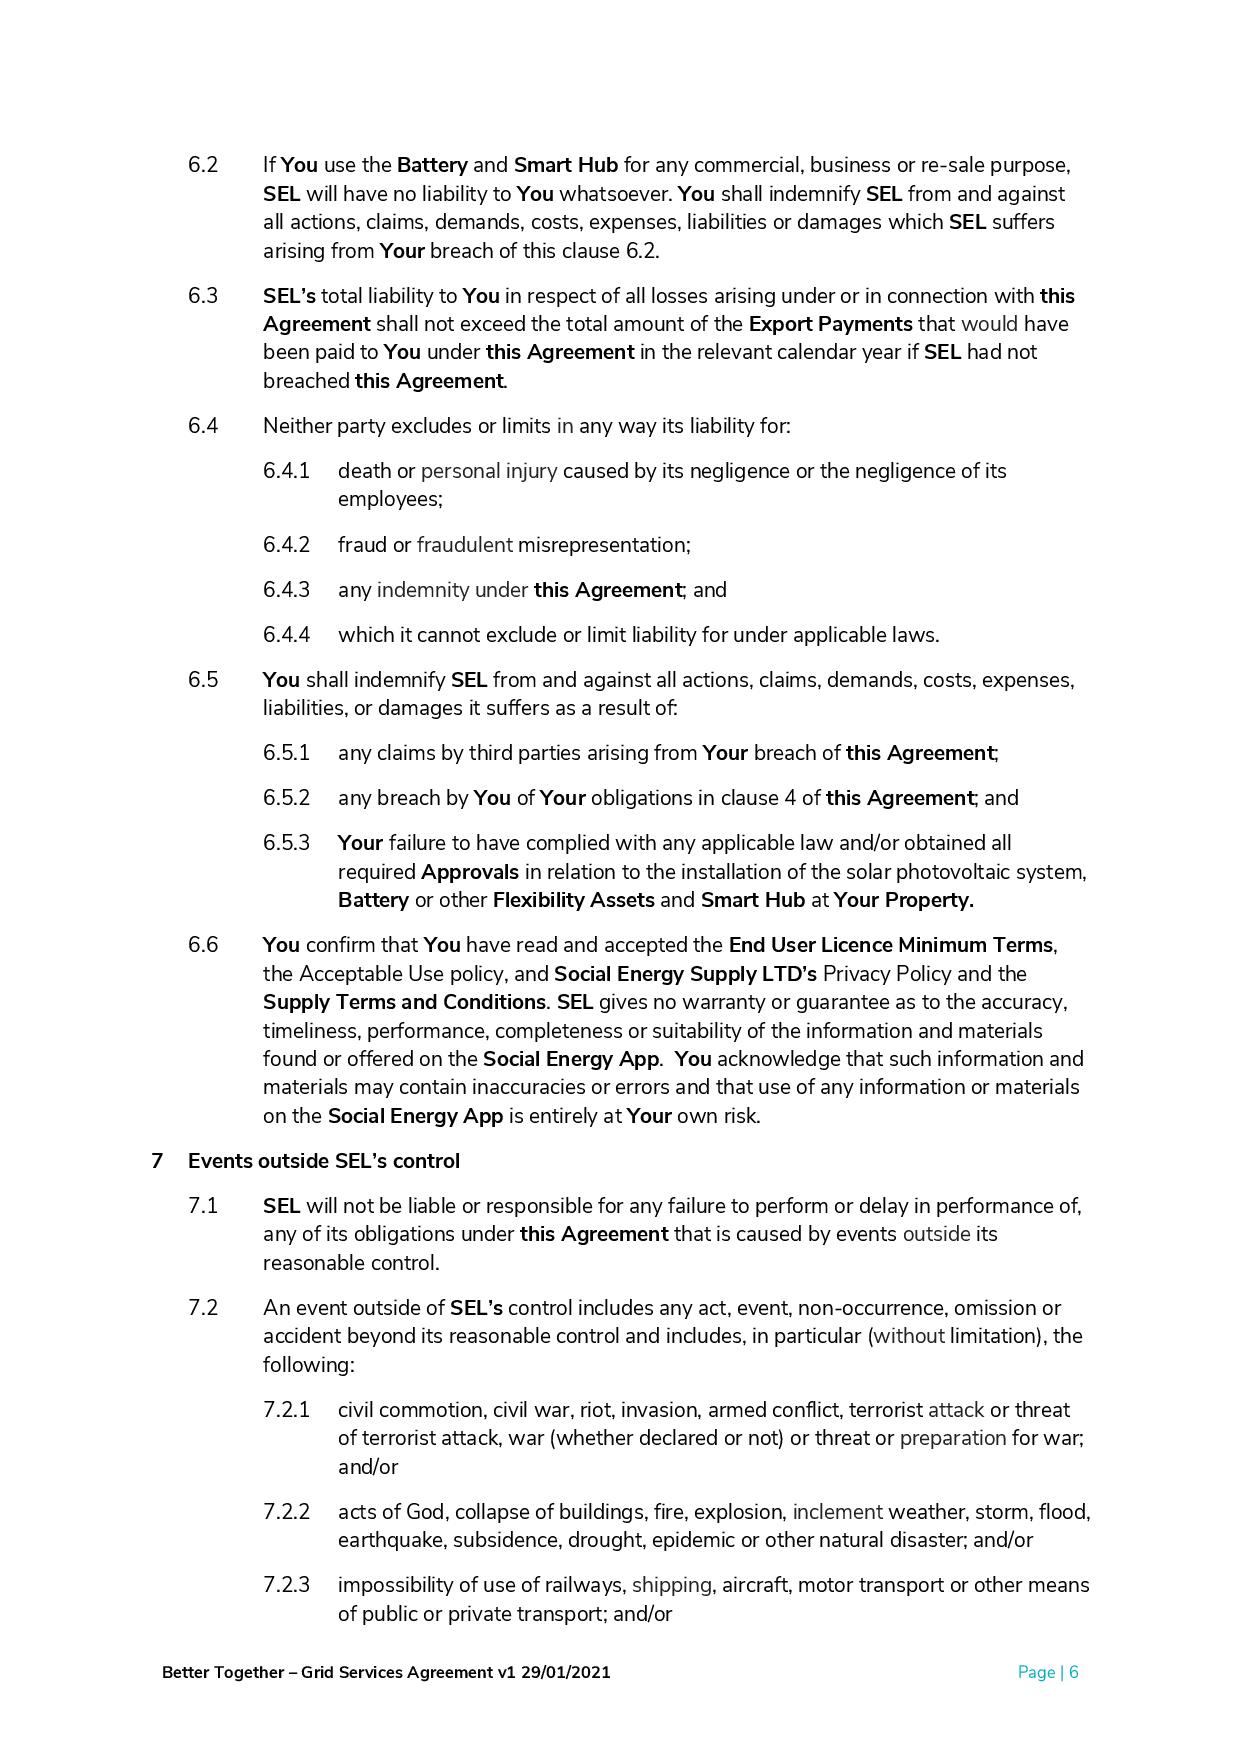 Better_Together_-_Grid_Services_Agreement-page-007.jpg